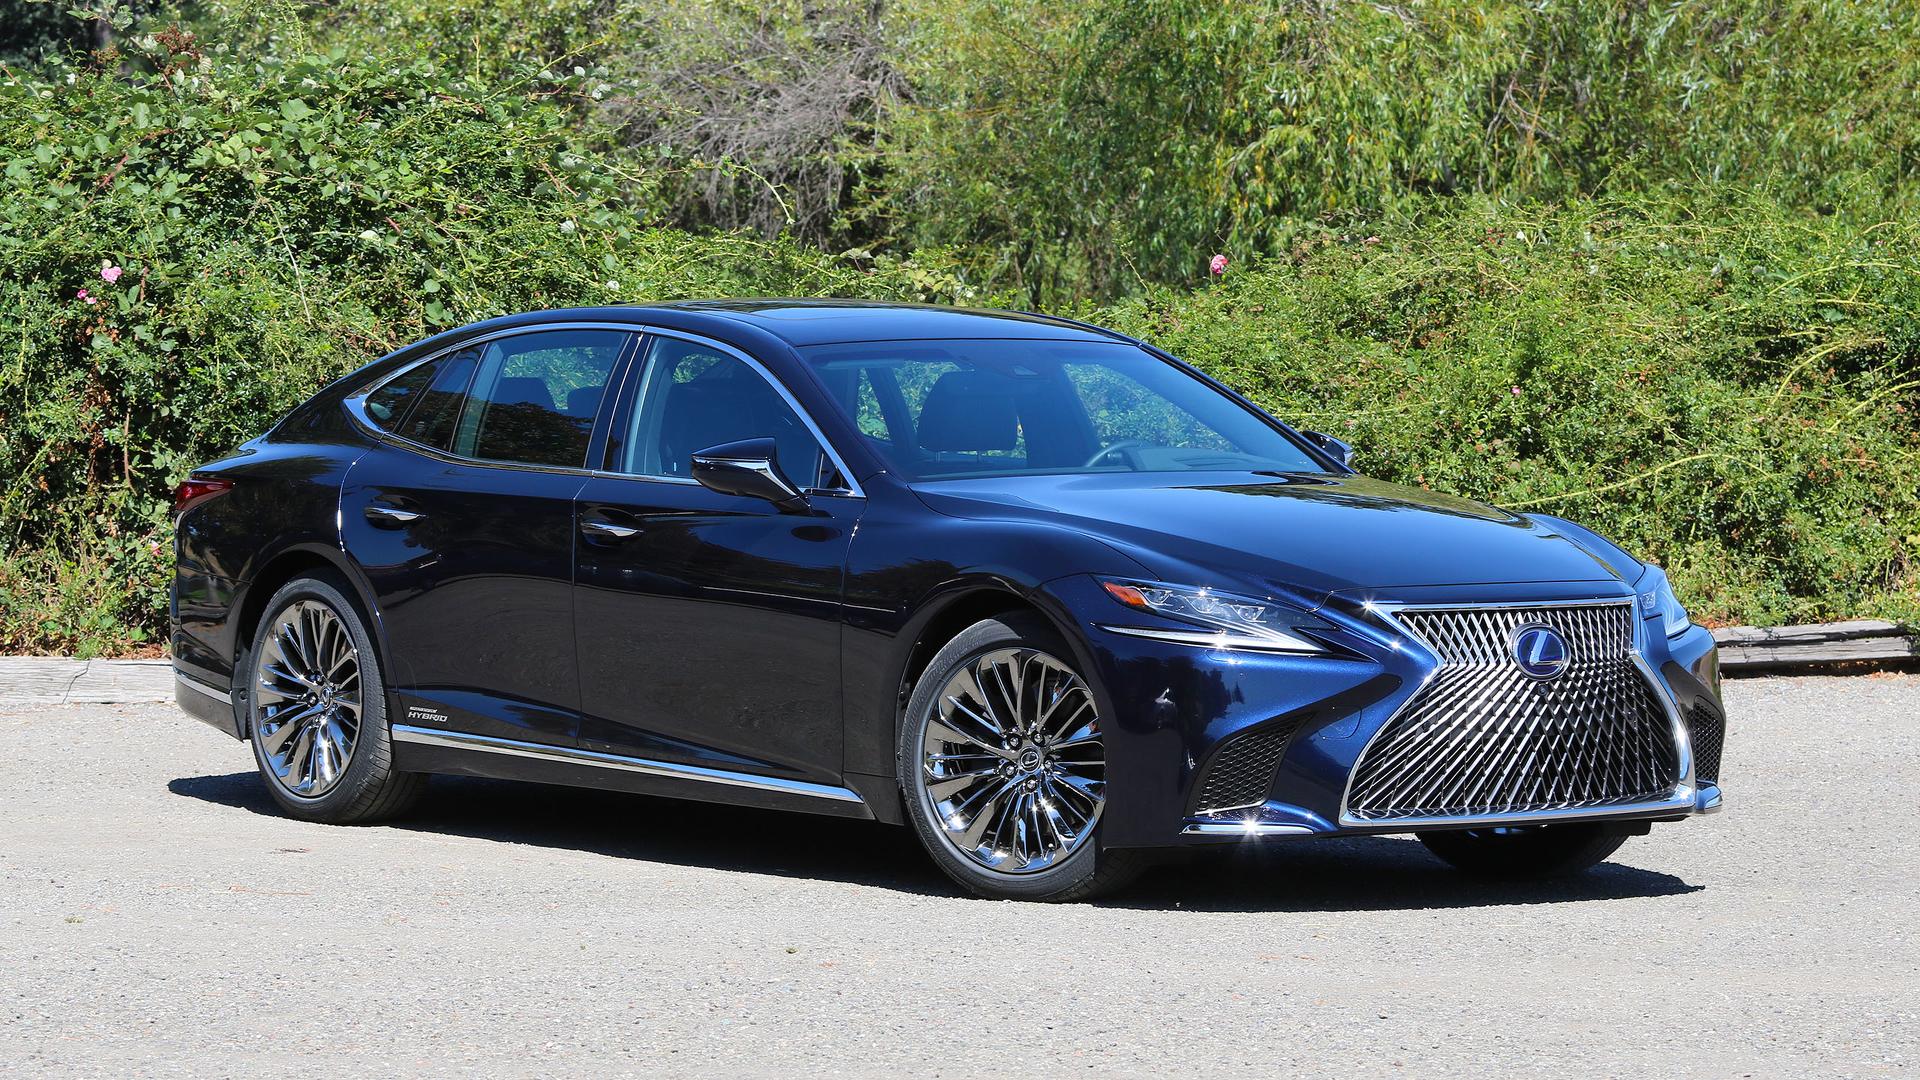 2018 Lexus LS 500h Review: Because There Has To Be A Hybrid